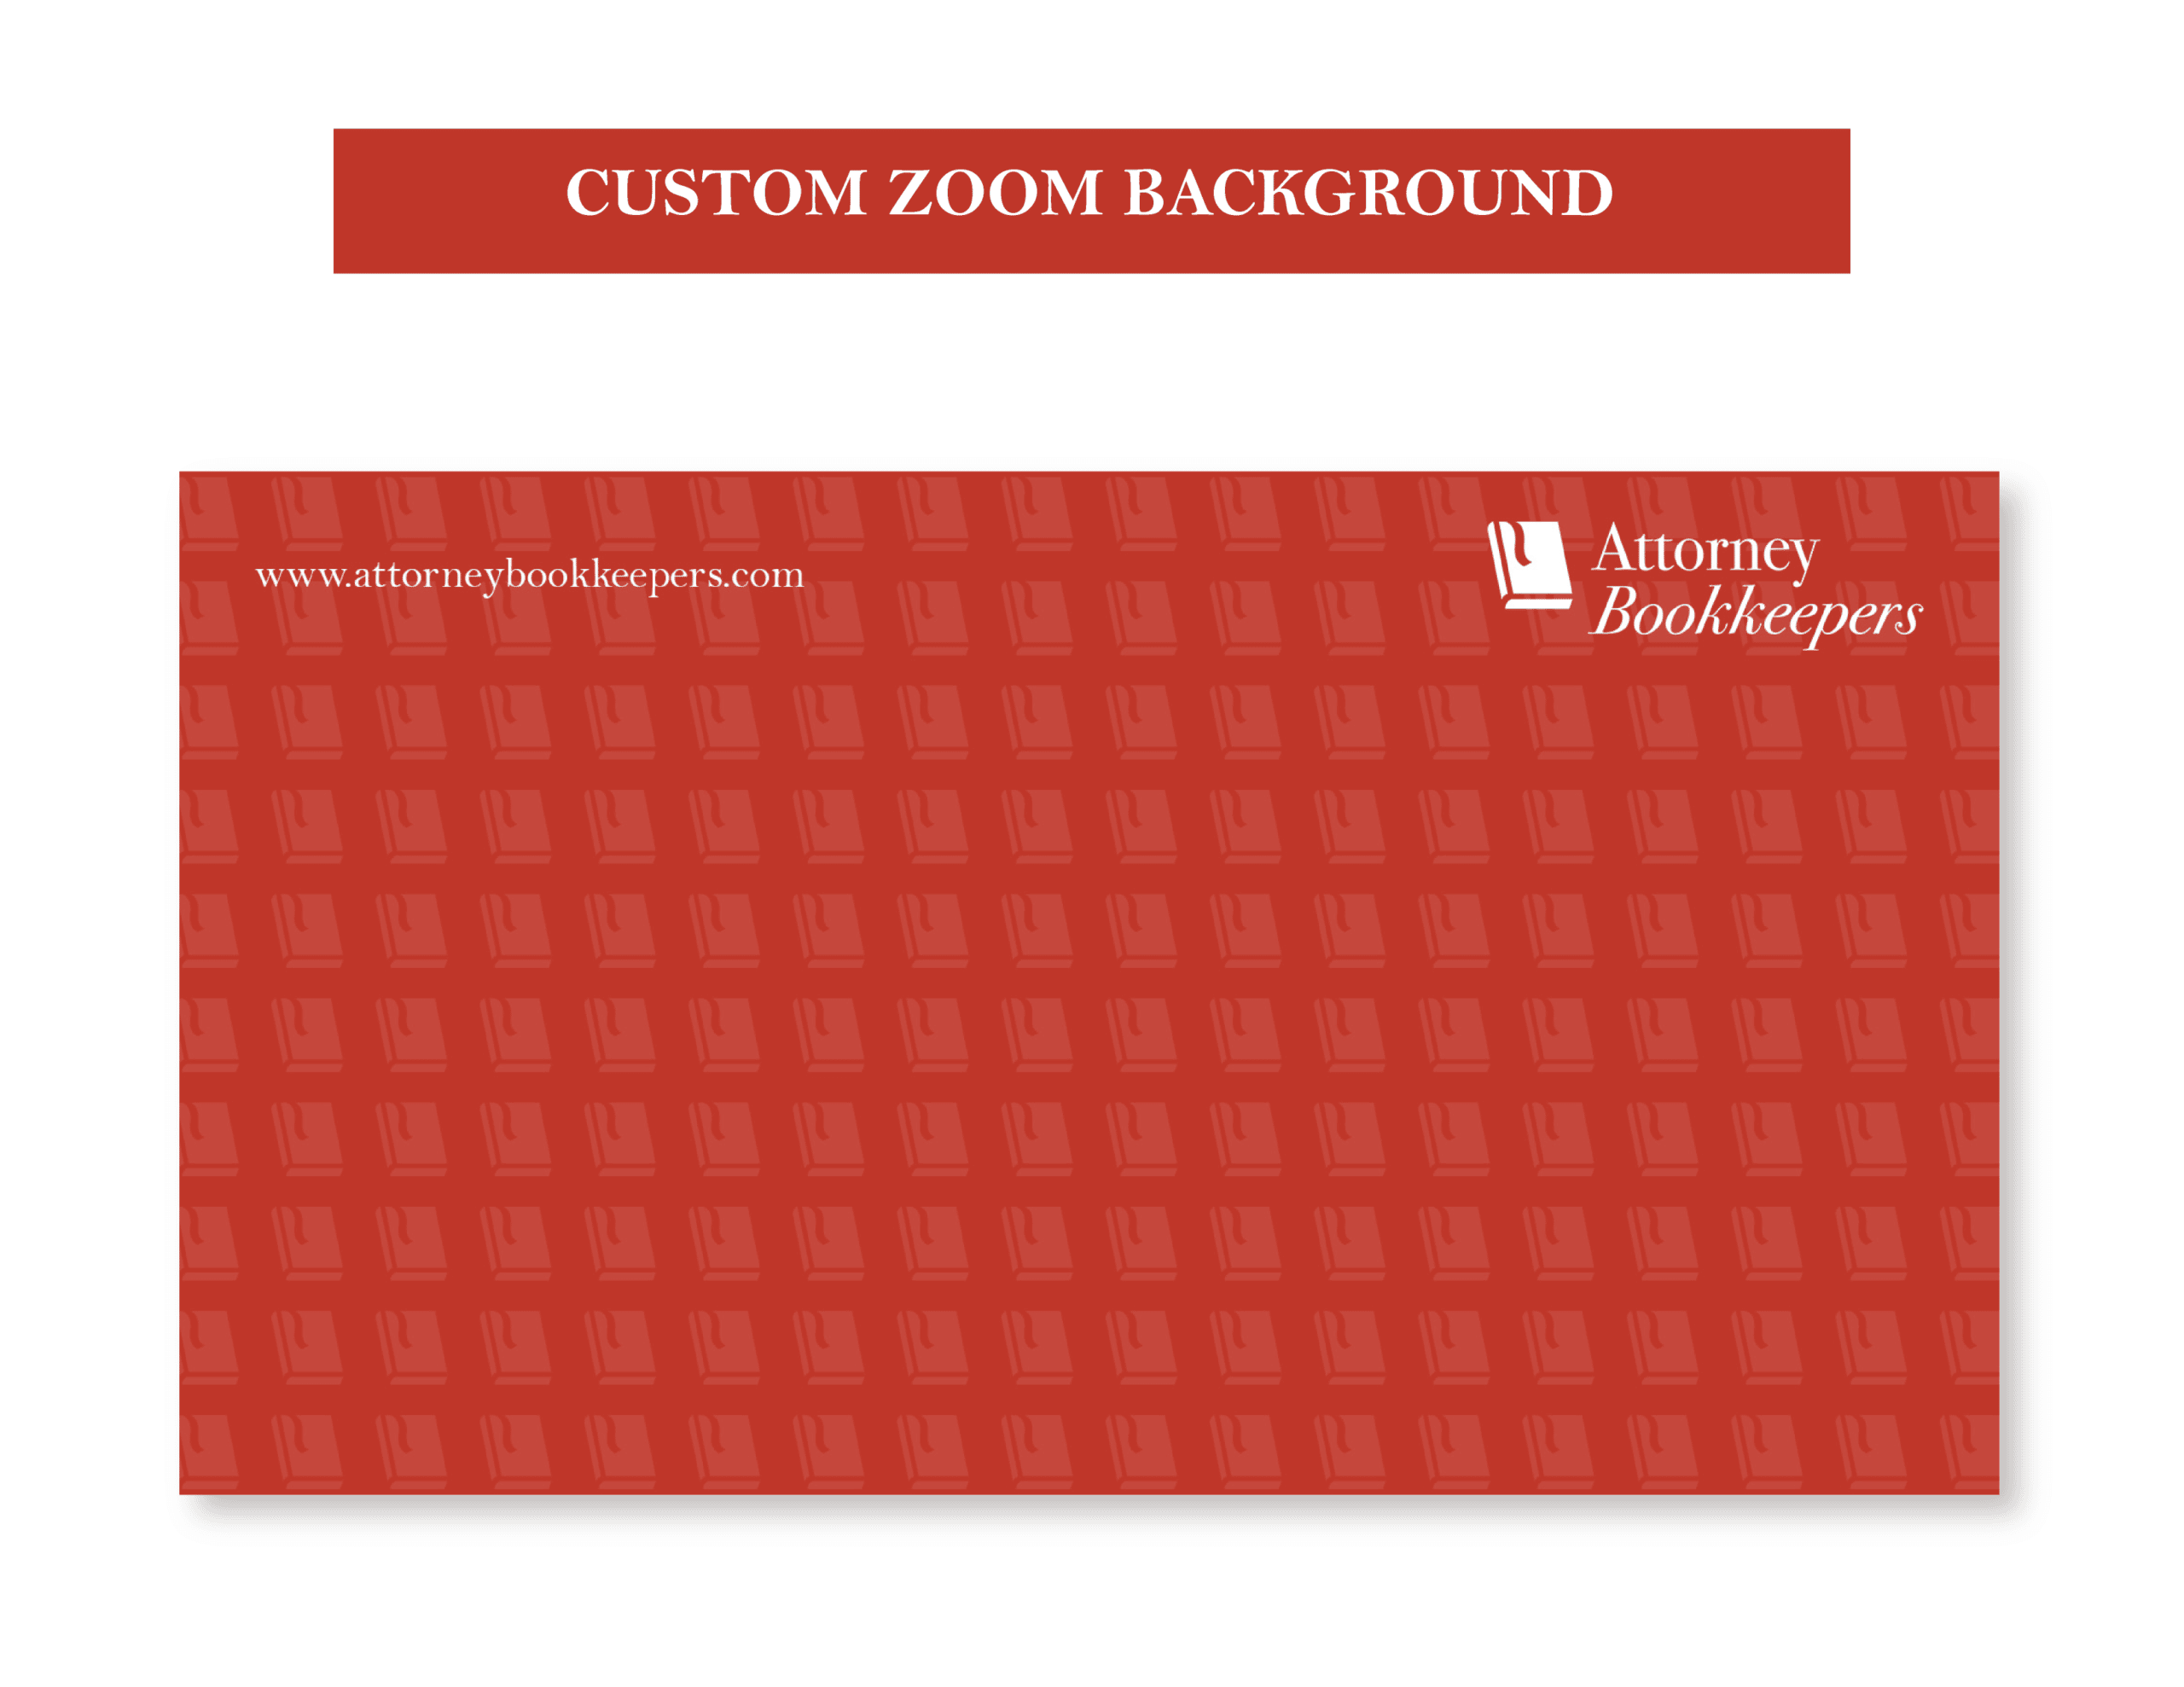 07AttorneyBookkeepERS_Showcase_Custom Zoom Background